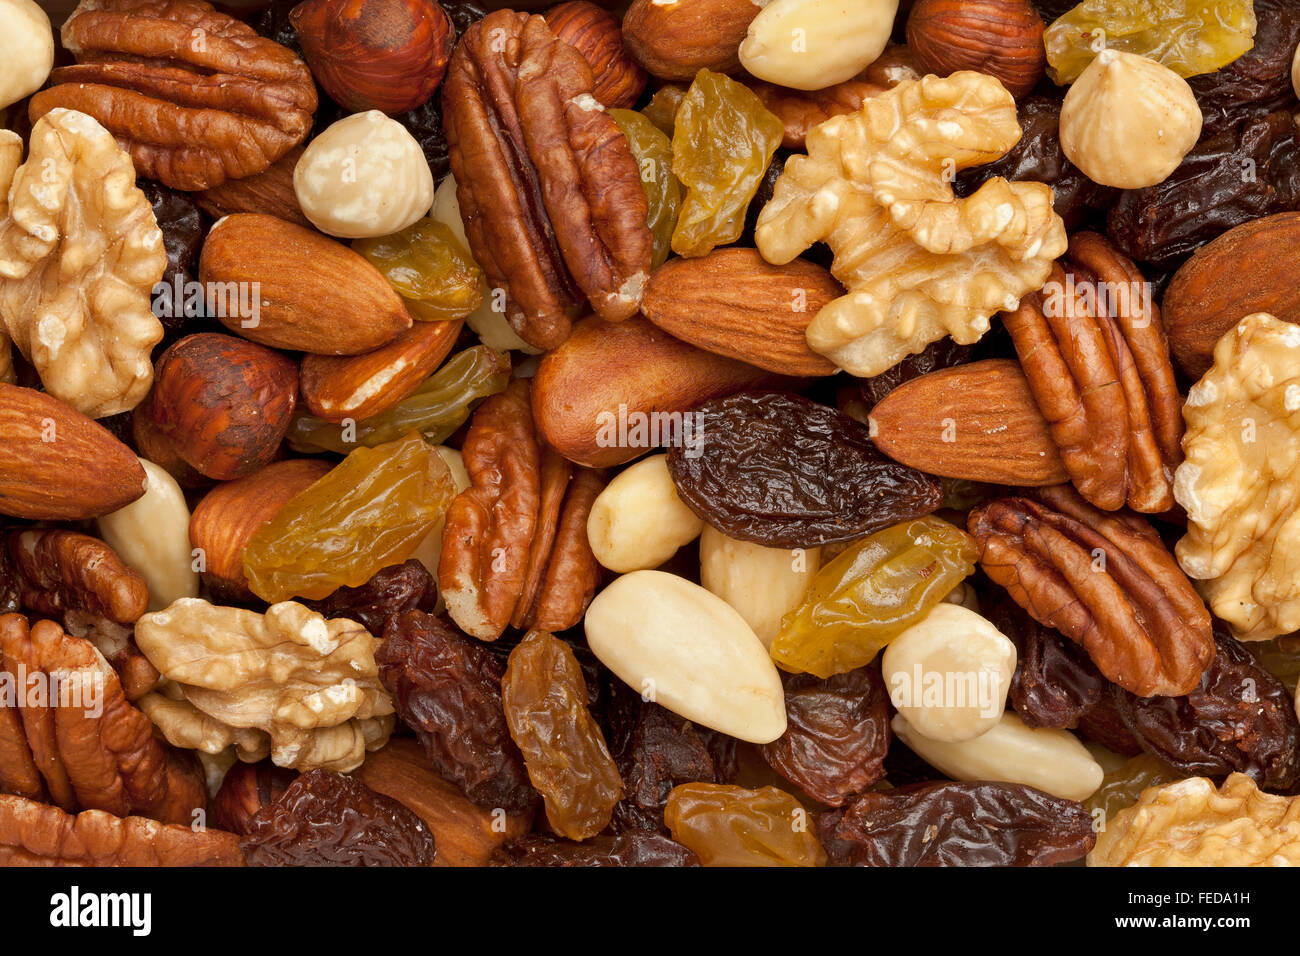 Raisons and nuts full frame Stock Photo